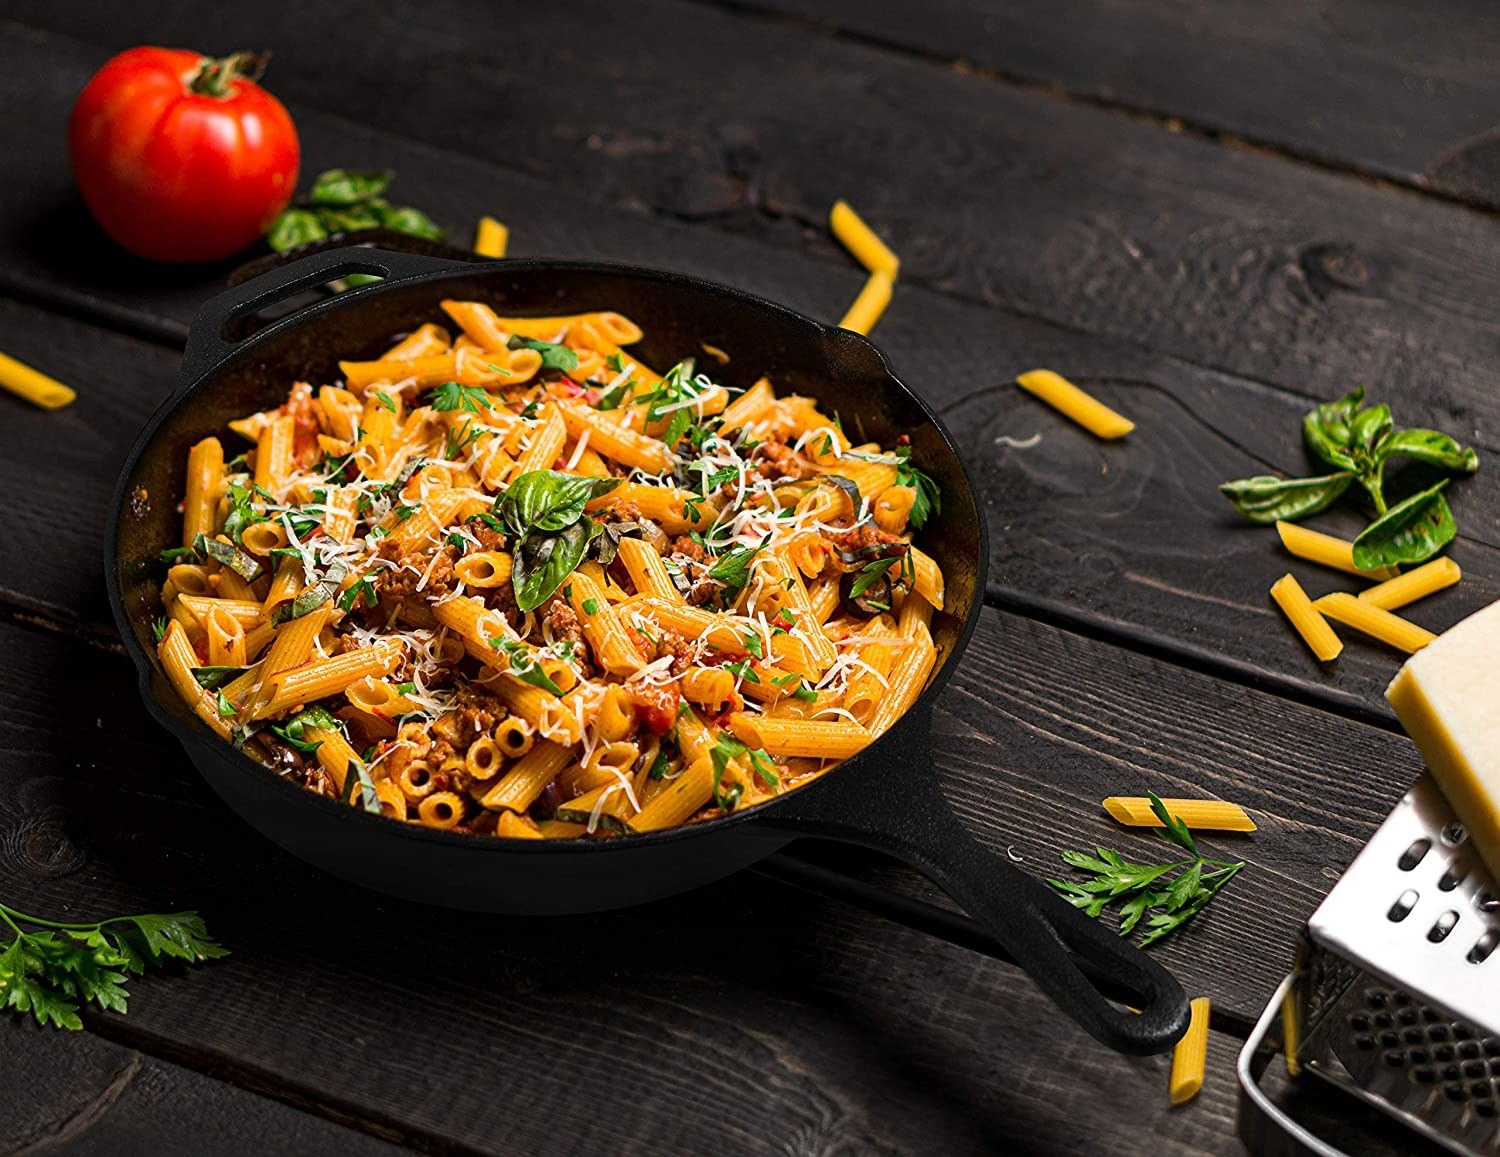 Penne with meat crumbles, tomato, basil, and cheese in a black cast-iron skillet